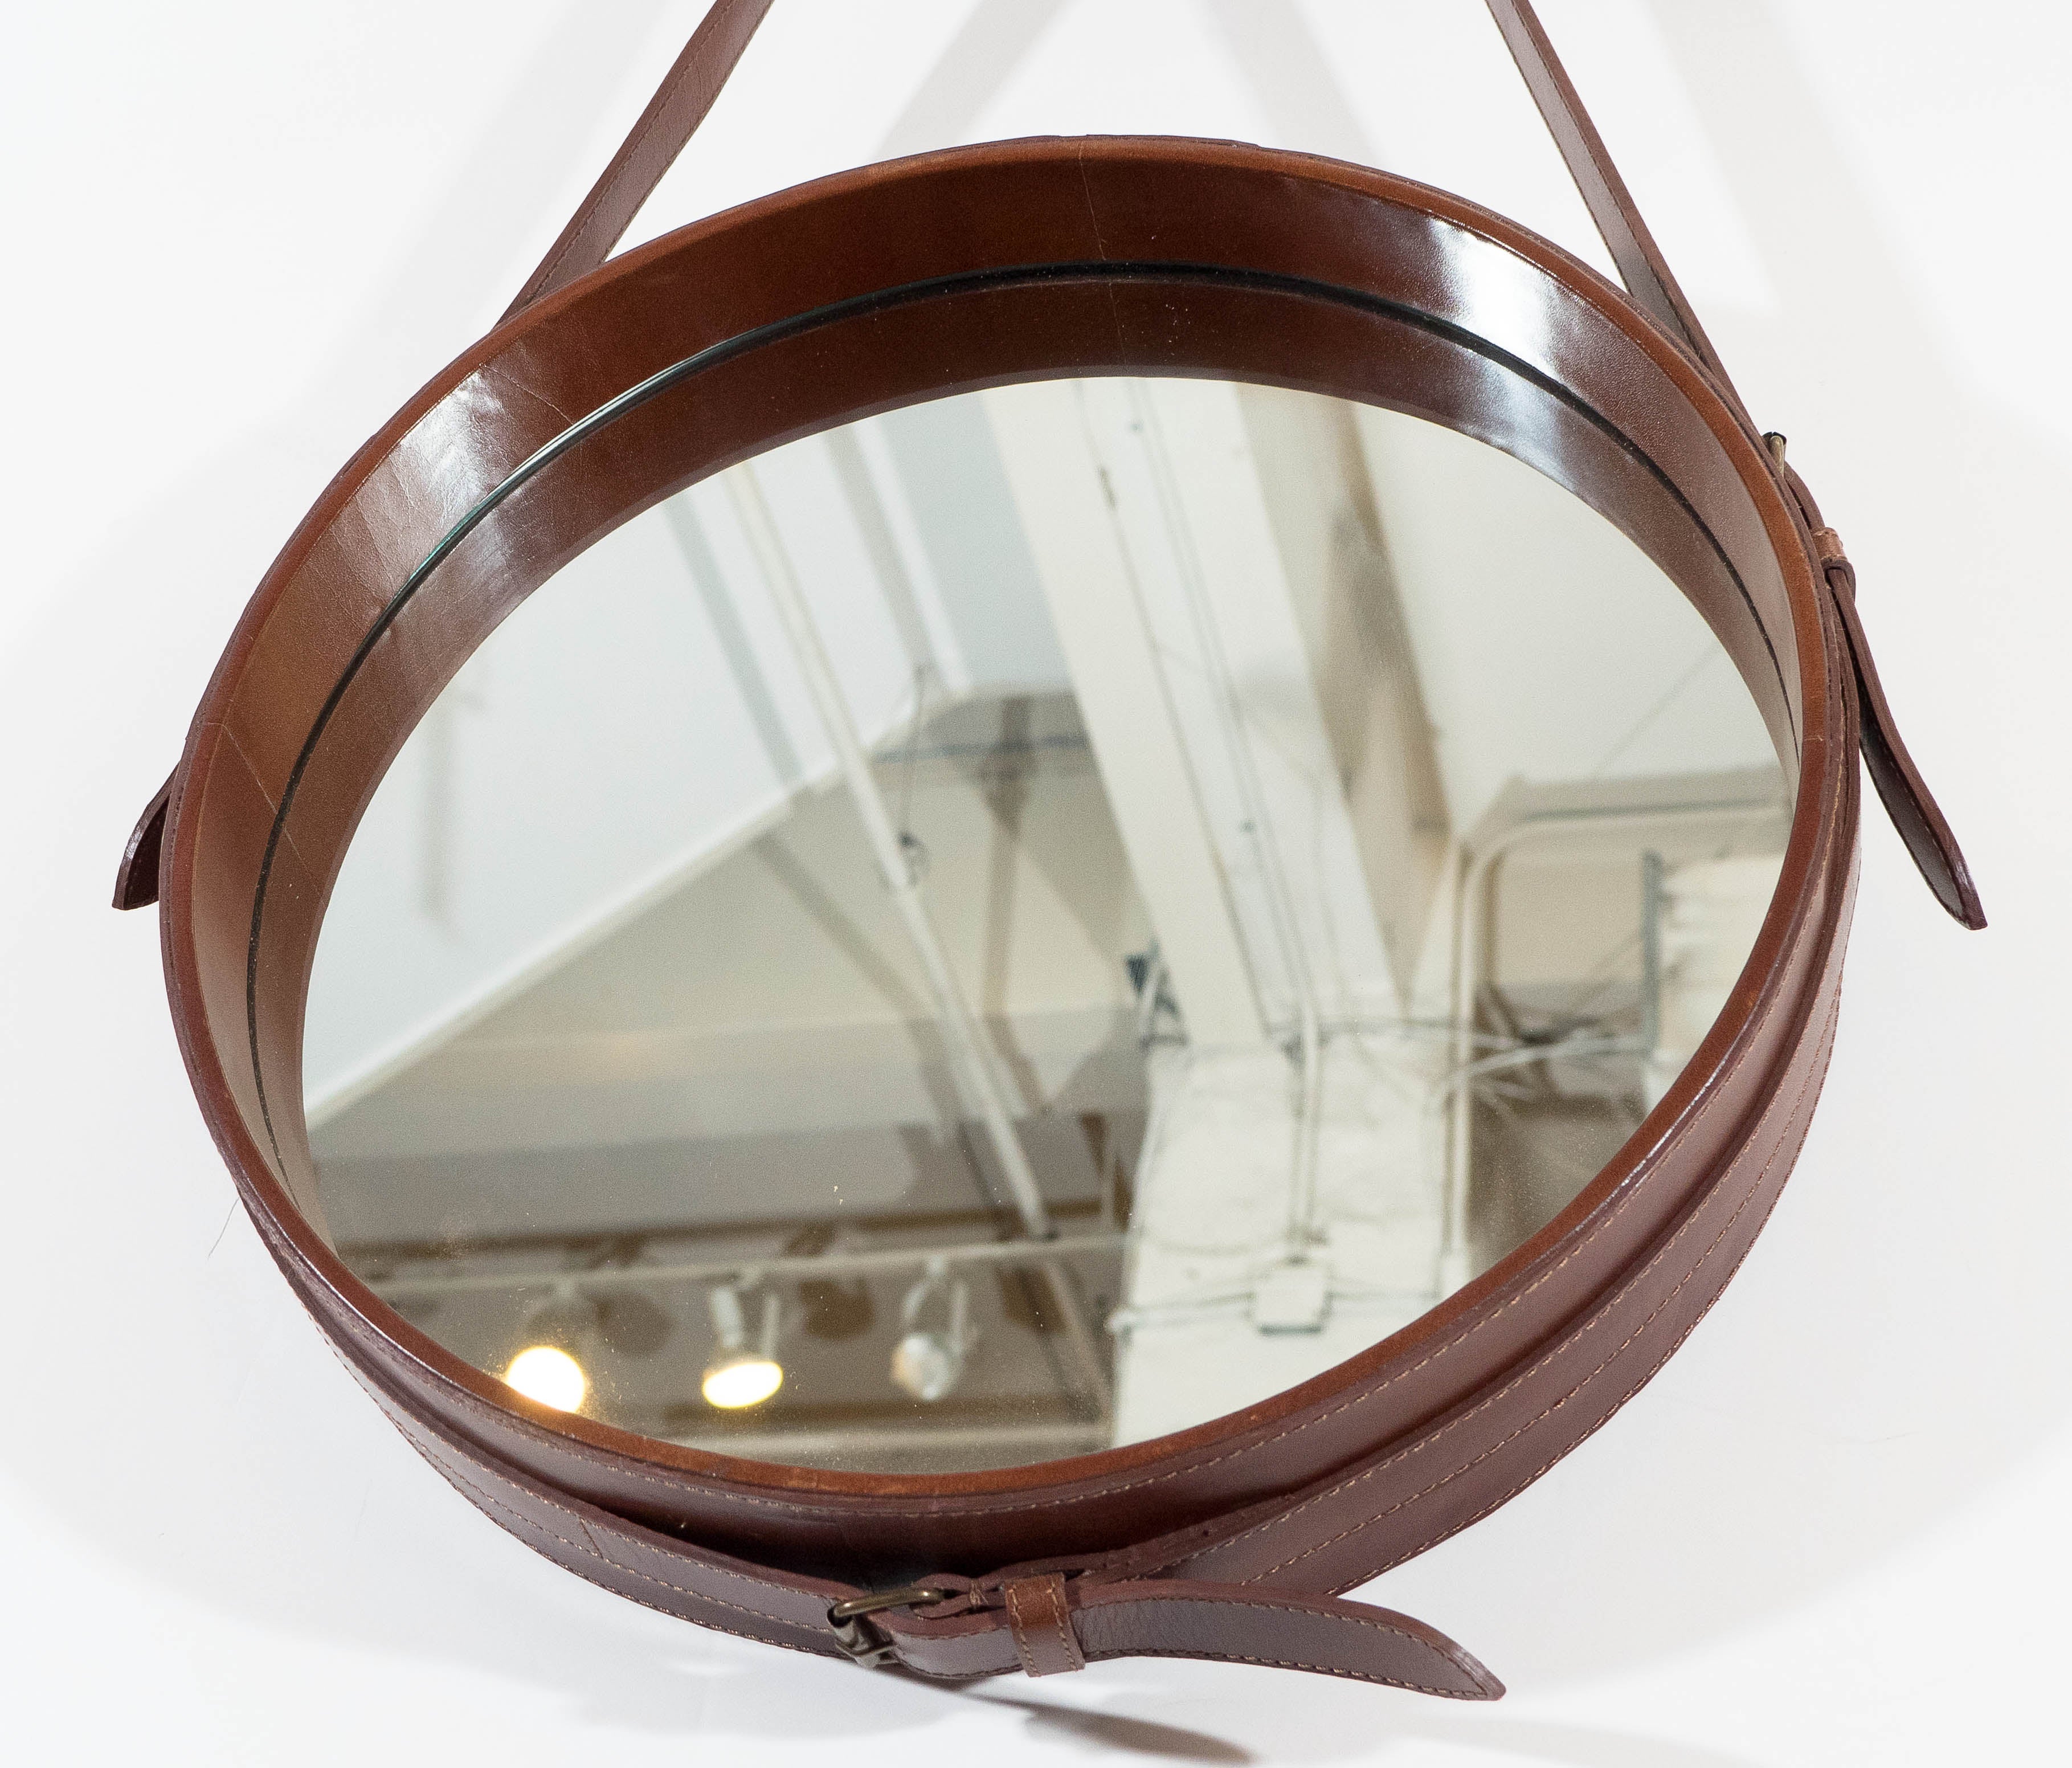 A round Adnet wall mirror, based on the original designs by namesake Jacques Adnet, the frame and strap-work in faux brown leather, with brass buckles. Very good condition, wear consistent with age and use; nice patina to the brass.